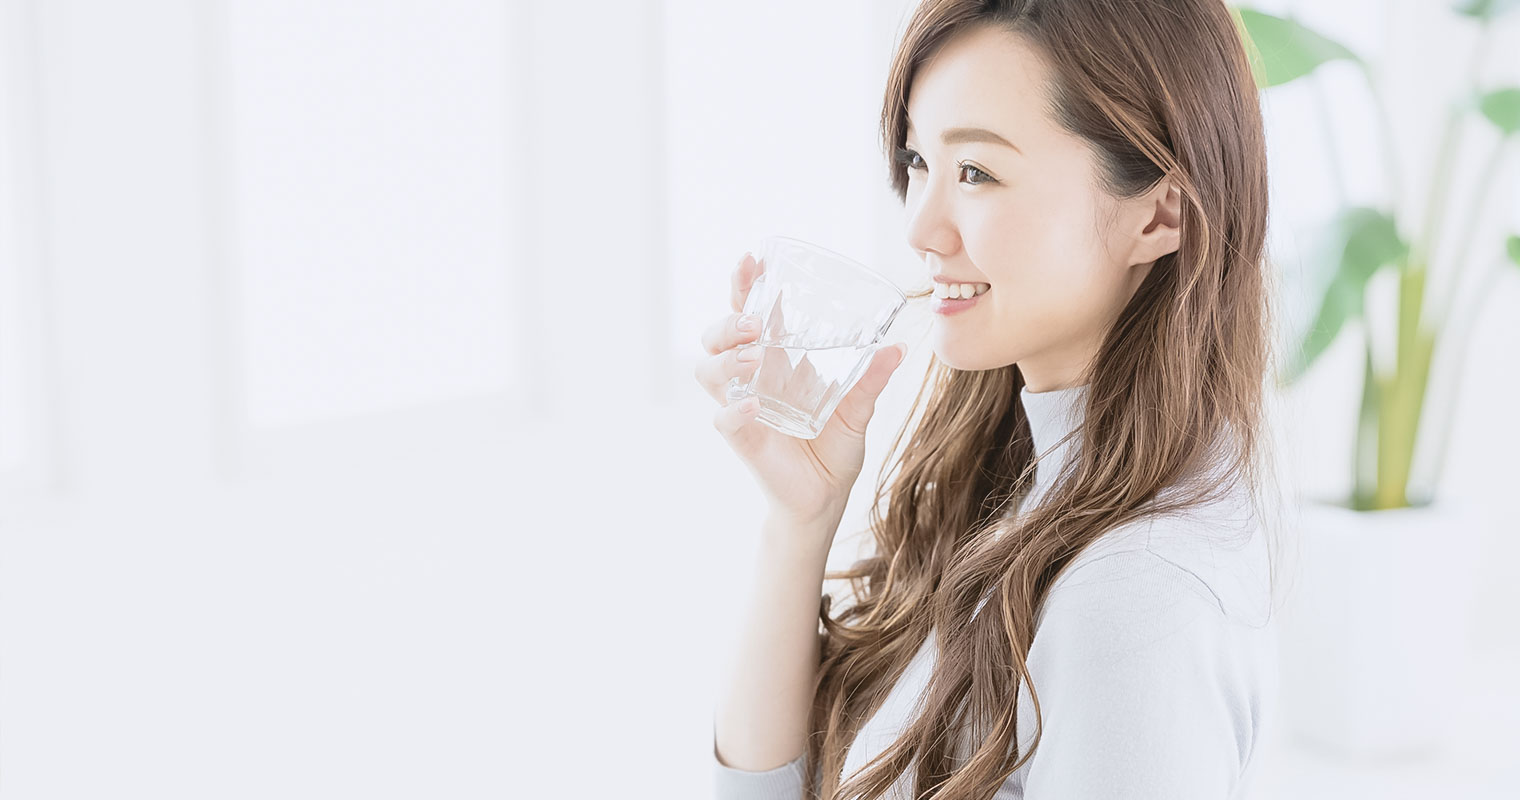 girl hydrating herself by drinking a glass of water